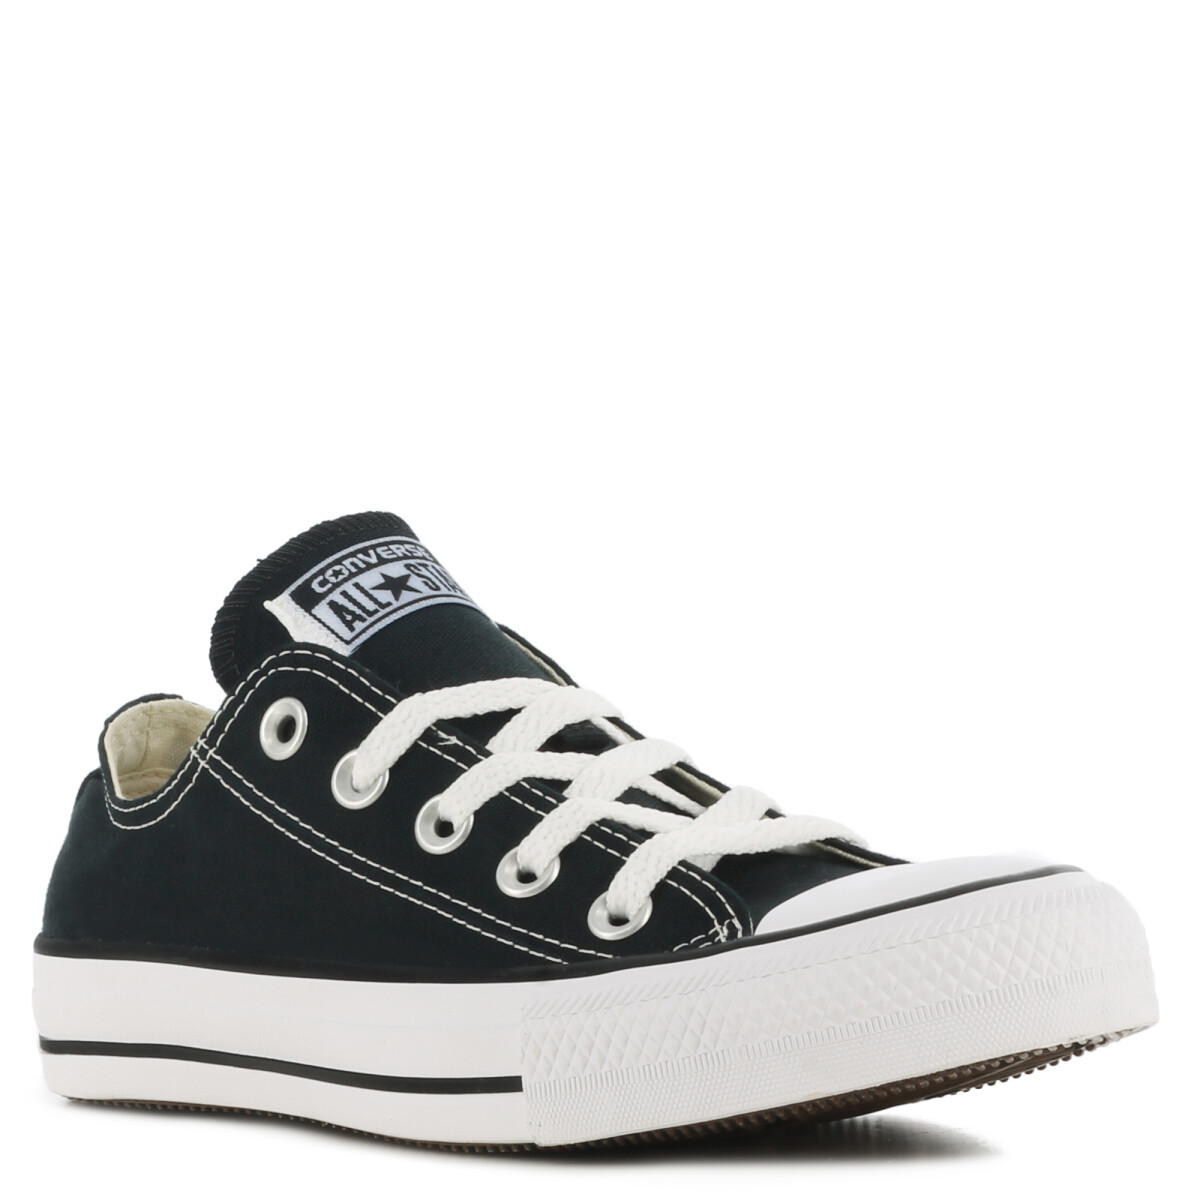 Classic - Basket Low Converse - All Star - Negro 